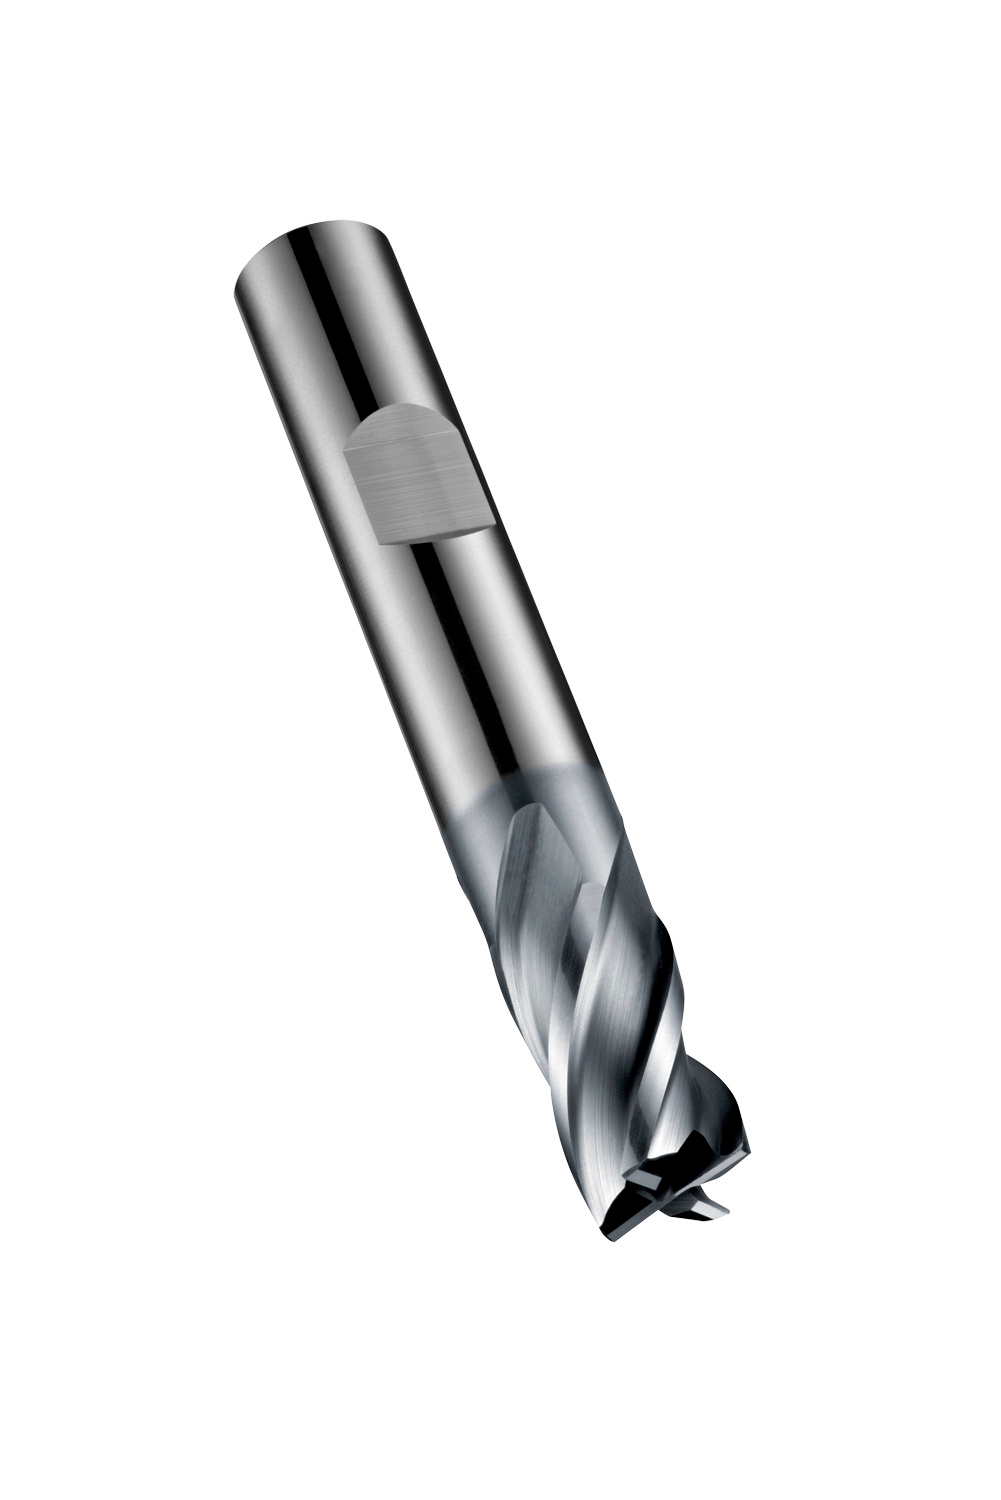 S804HB5.0 - End Mills